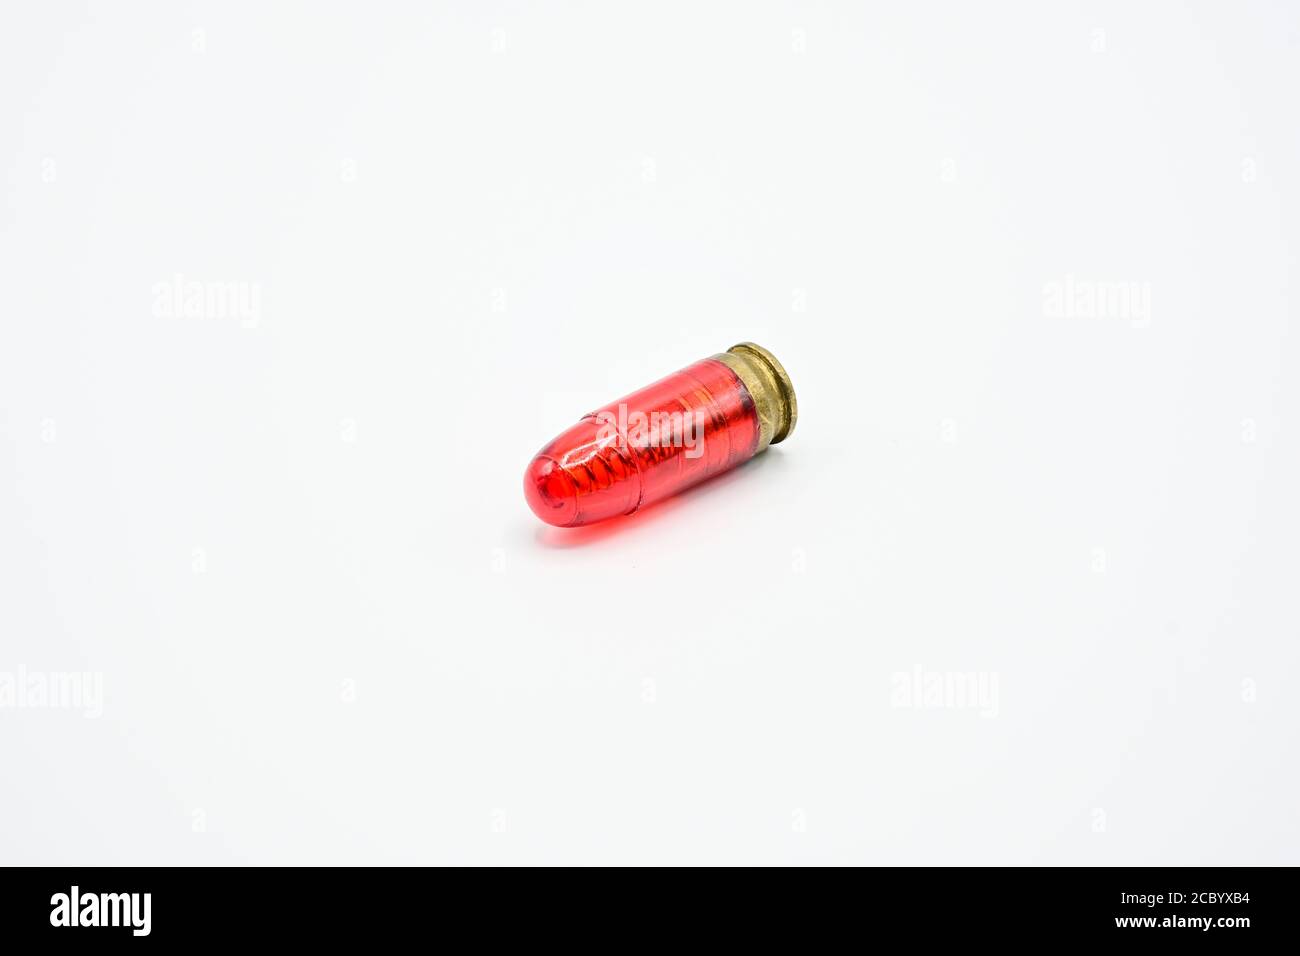 https://c8.alamy.com/comp/2CBYXB4/dry-fire-training-on-a-white-background-fake-bullets-made-from-red-plastic-are-used-for-shooting-practice-2CBYXB4.jpg